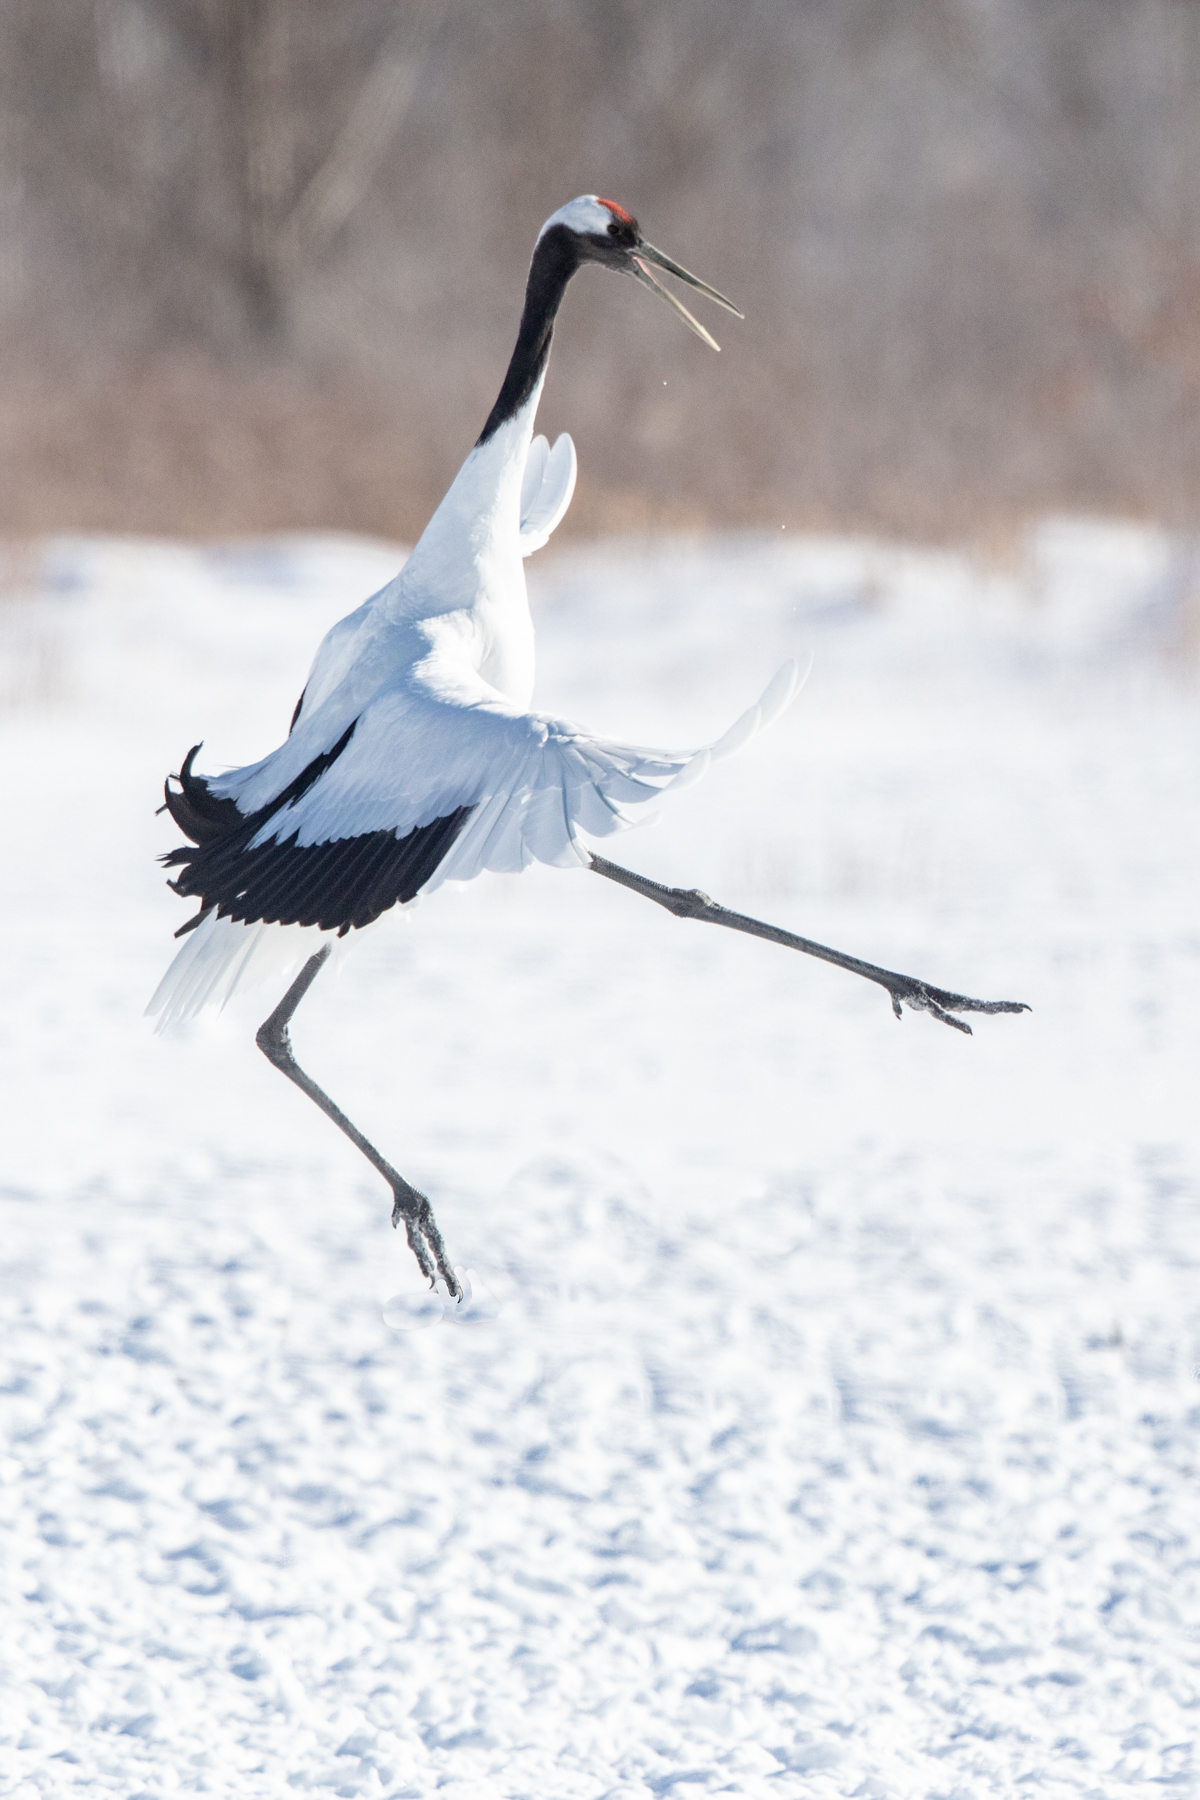 A dancing Red-crowned Crane hurls itself high into the air (image by Mark Beaman)